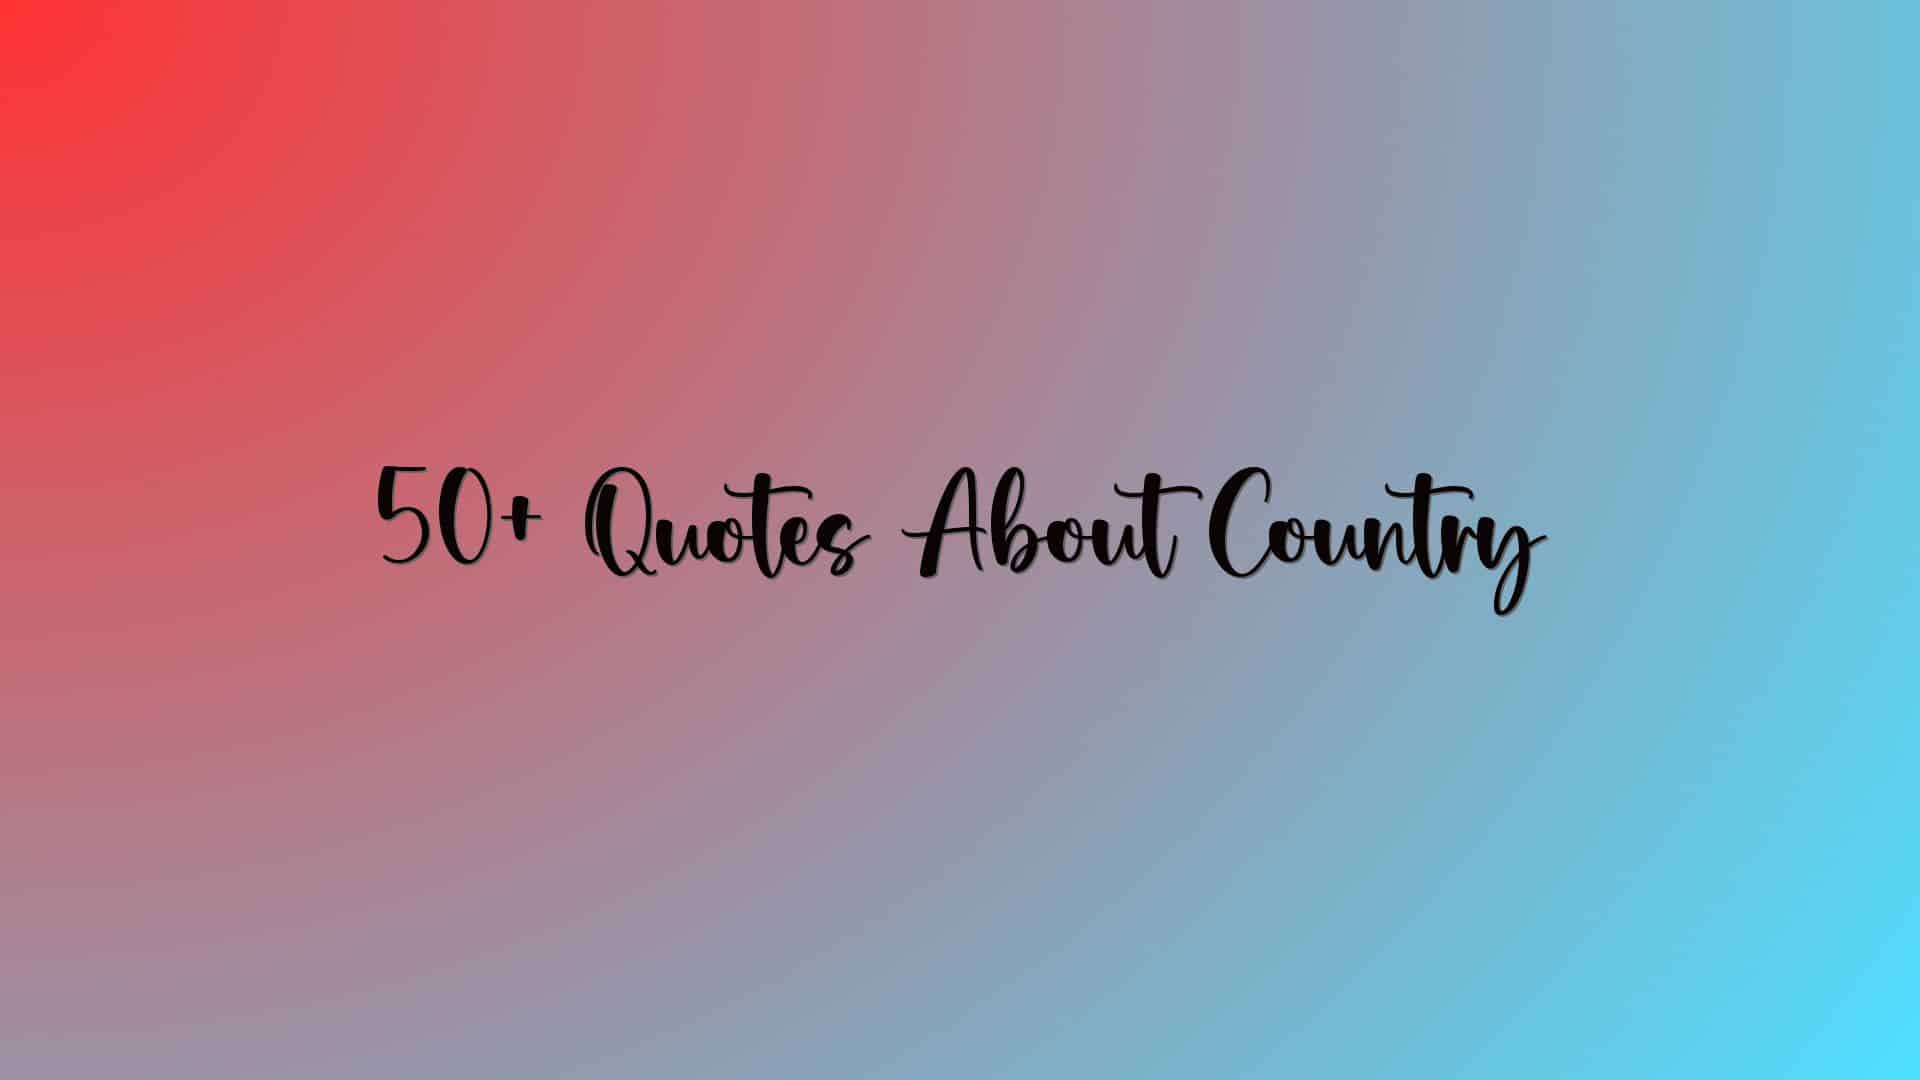 50+ Quotes About Country